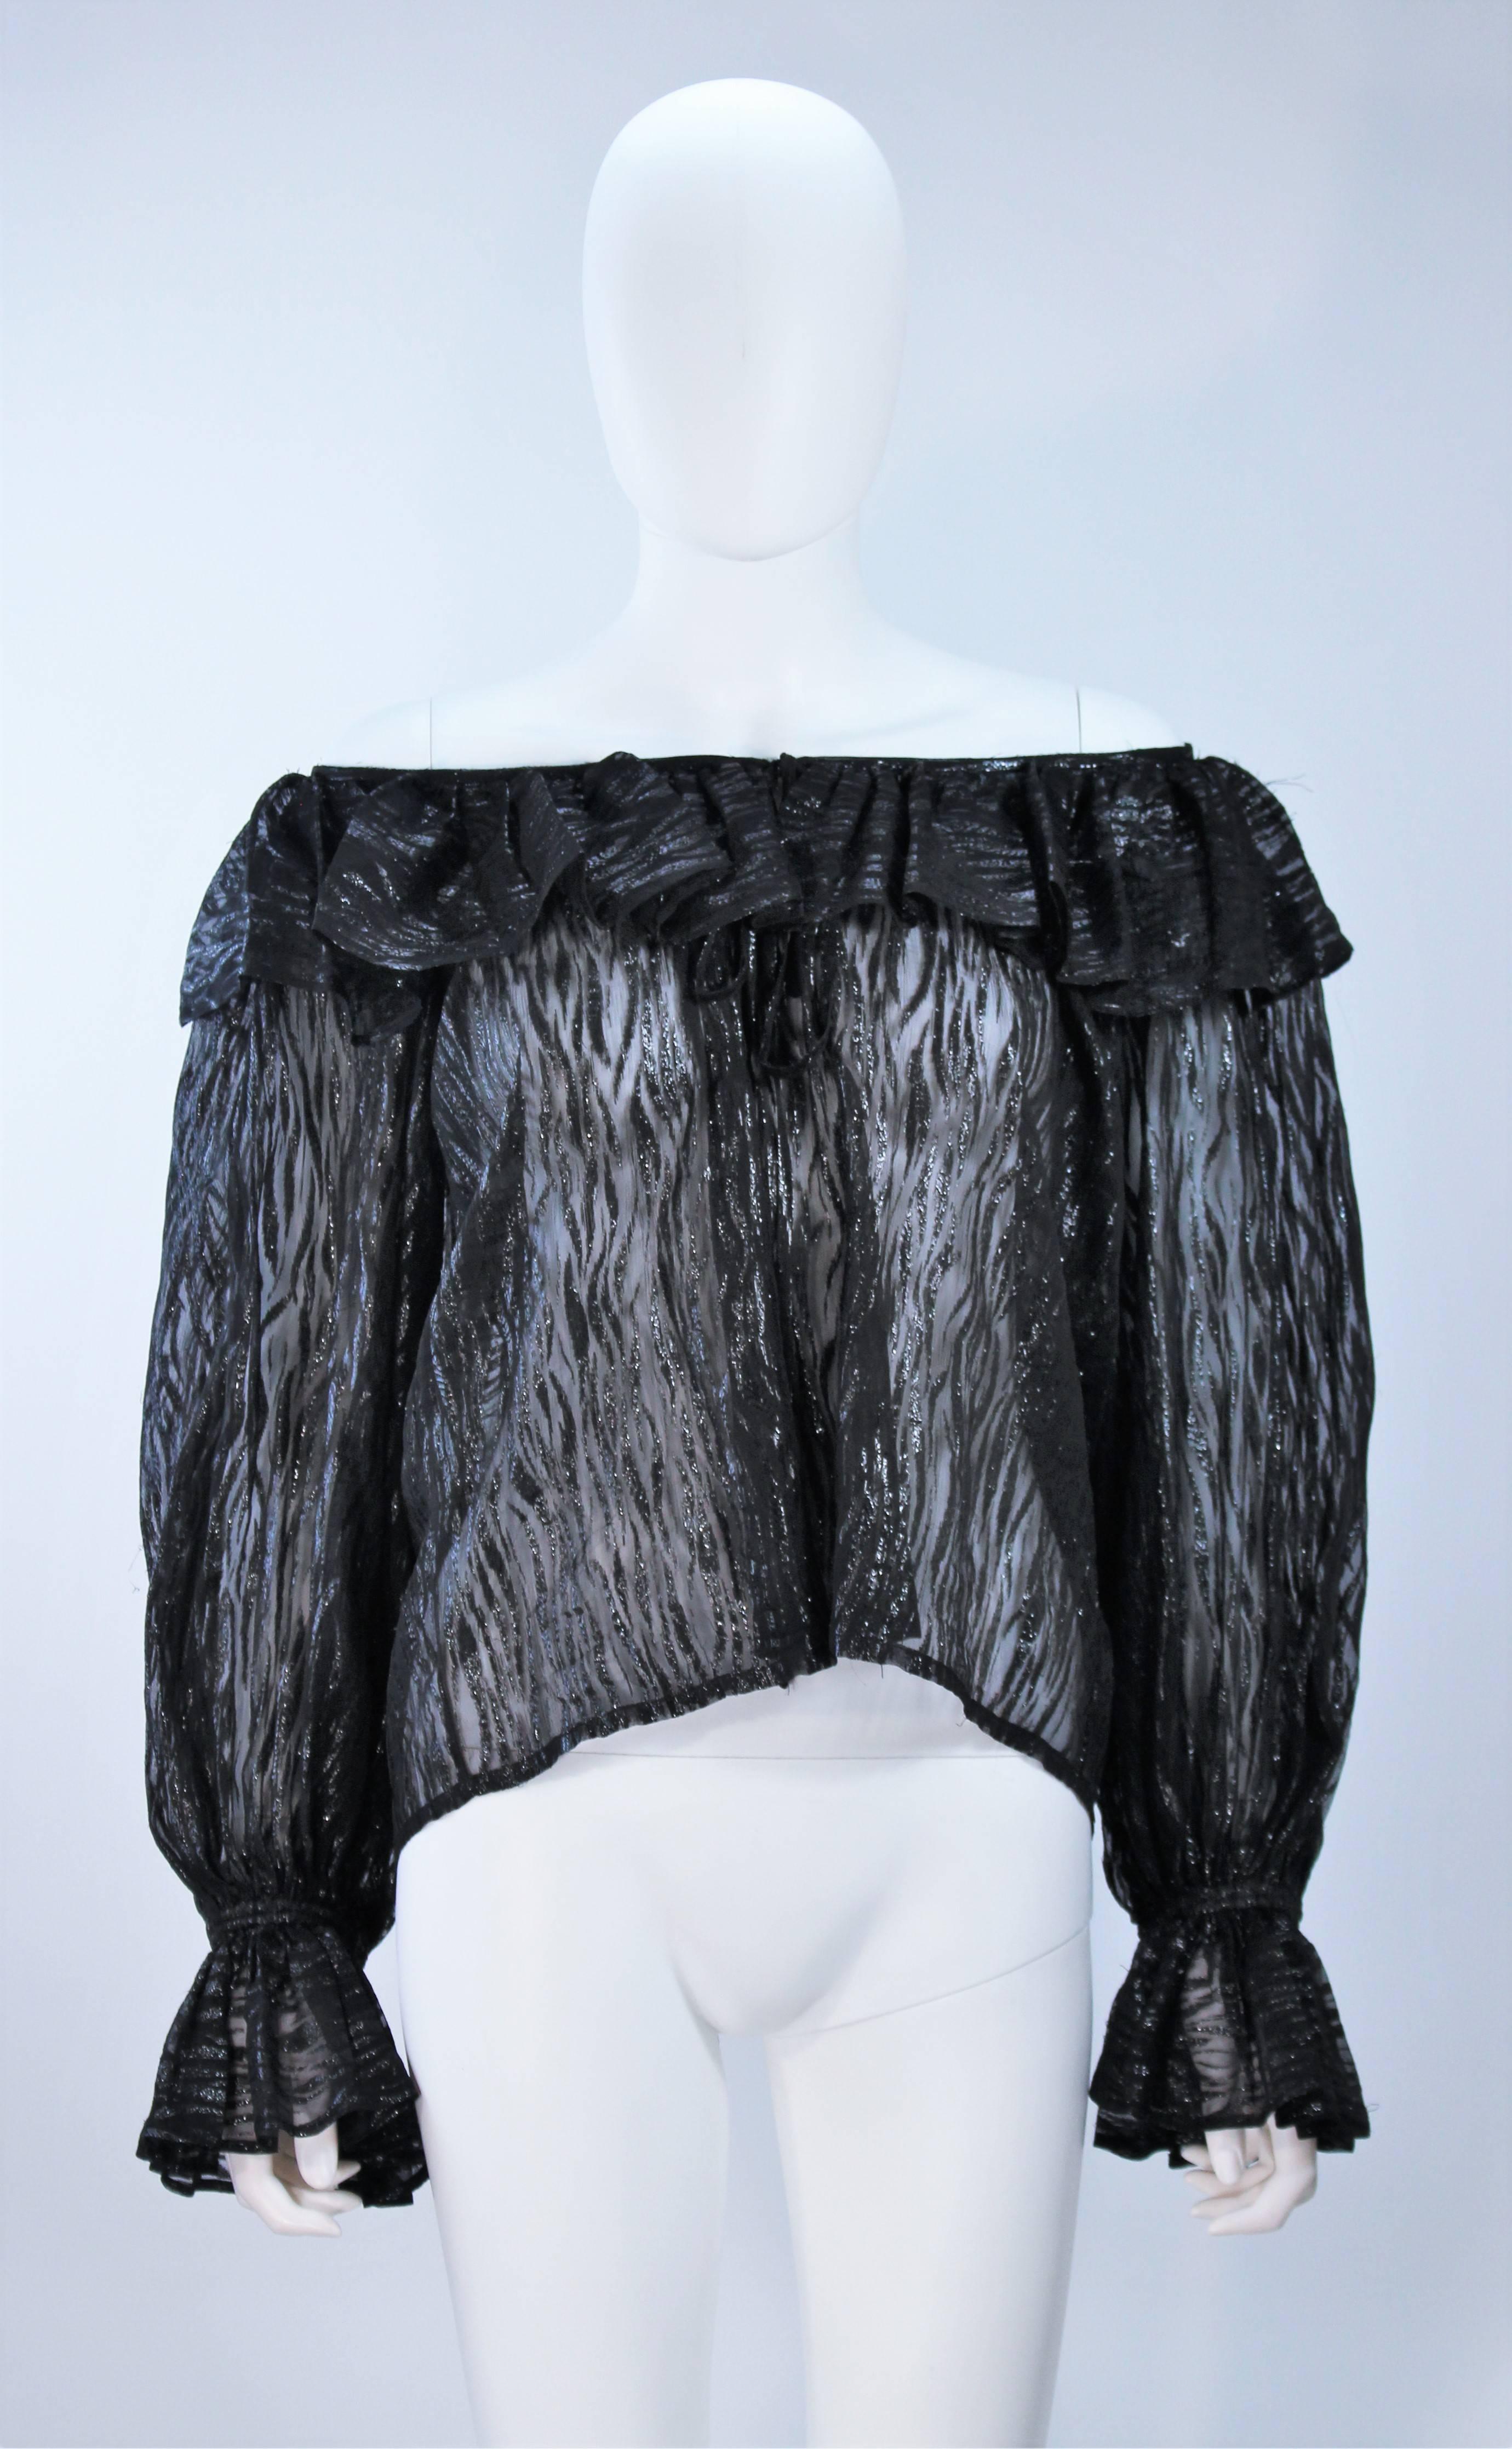  This Yves Saint Laurent blouse is composed of a sheer black printed silk with a textured lame. Features a stretch elastic neckline and sleeves with ruffle accents. Pull over style with tie front. In excellent vintage condition. 

**Please